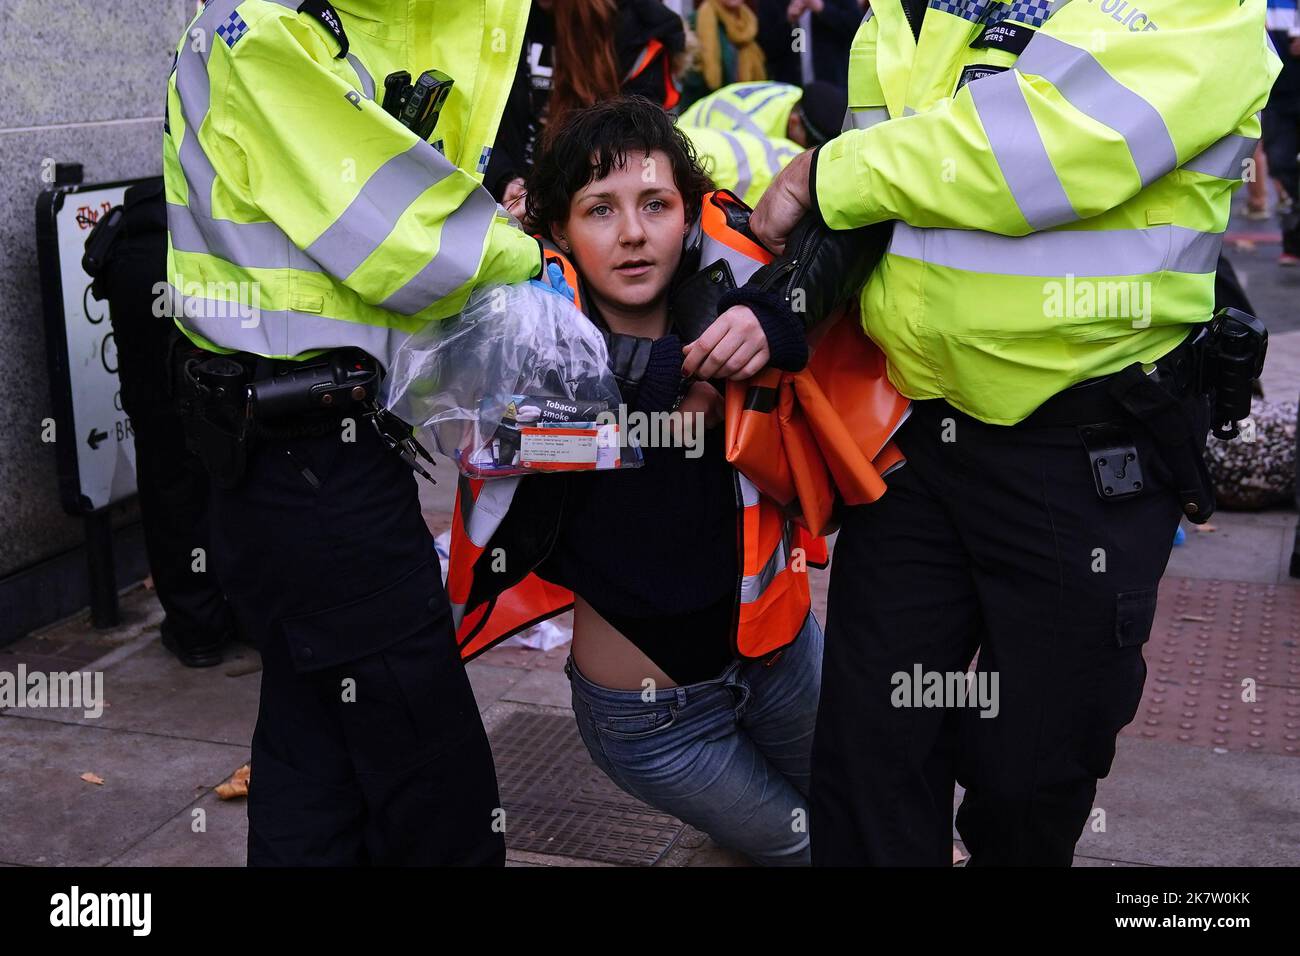 Police remove activists from Just Stop Oil during their protest on ...